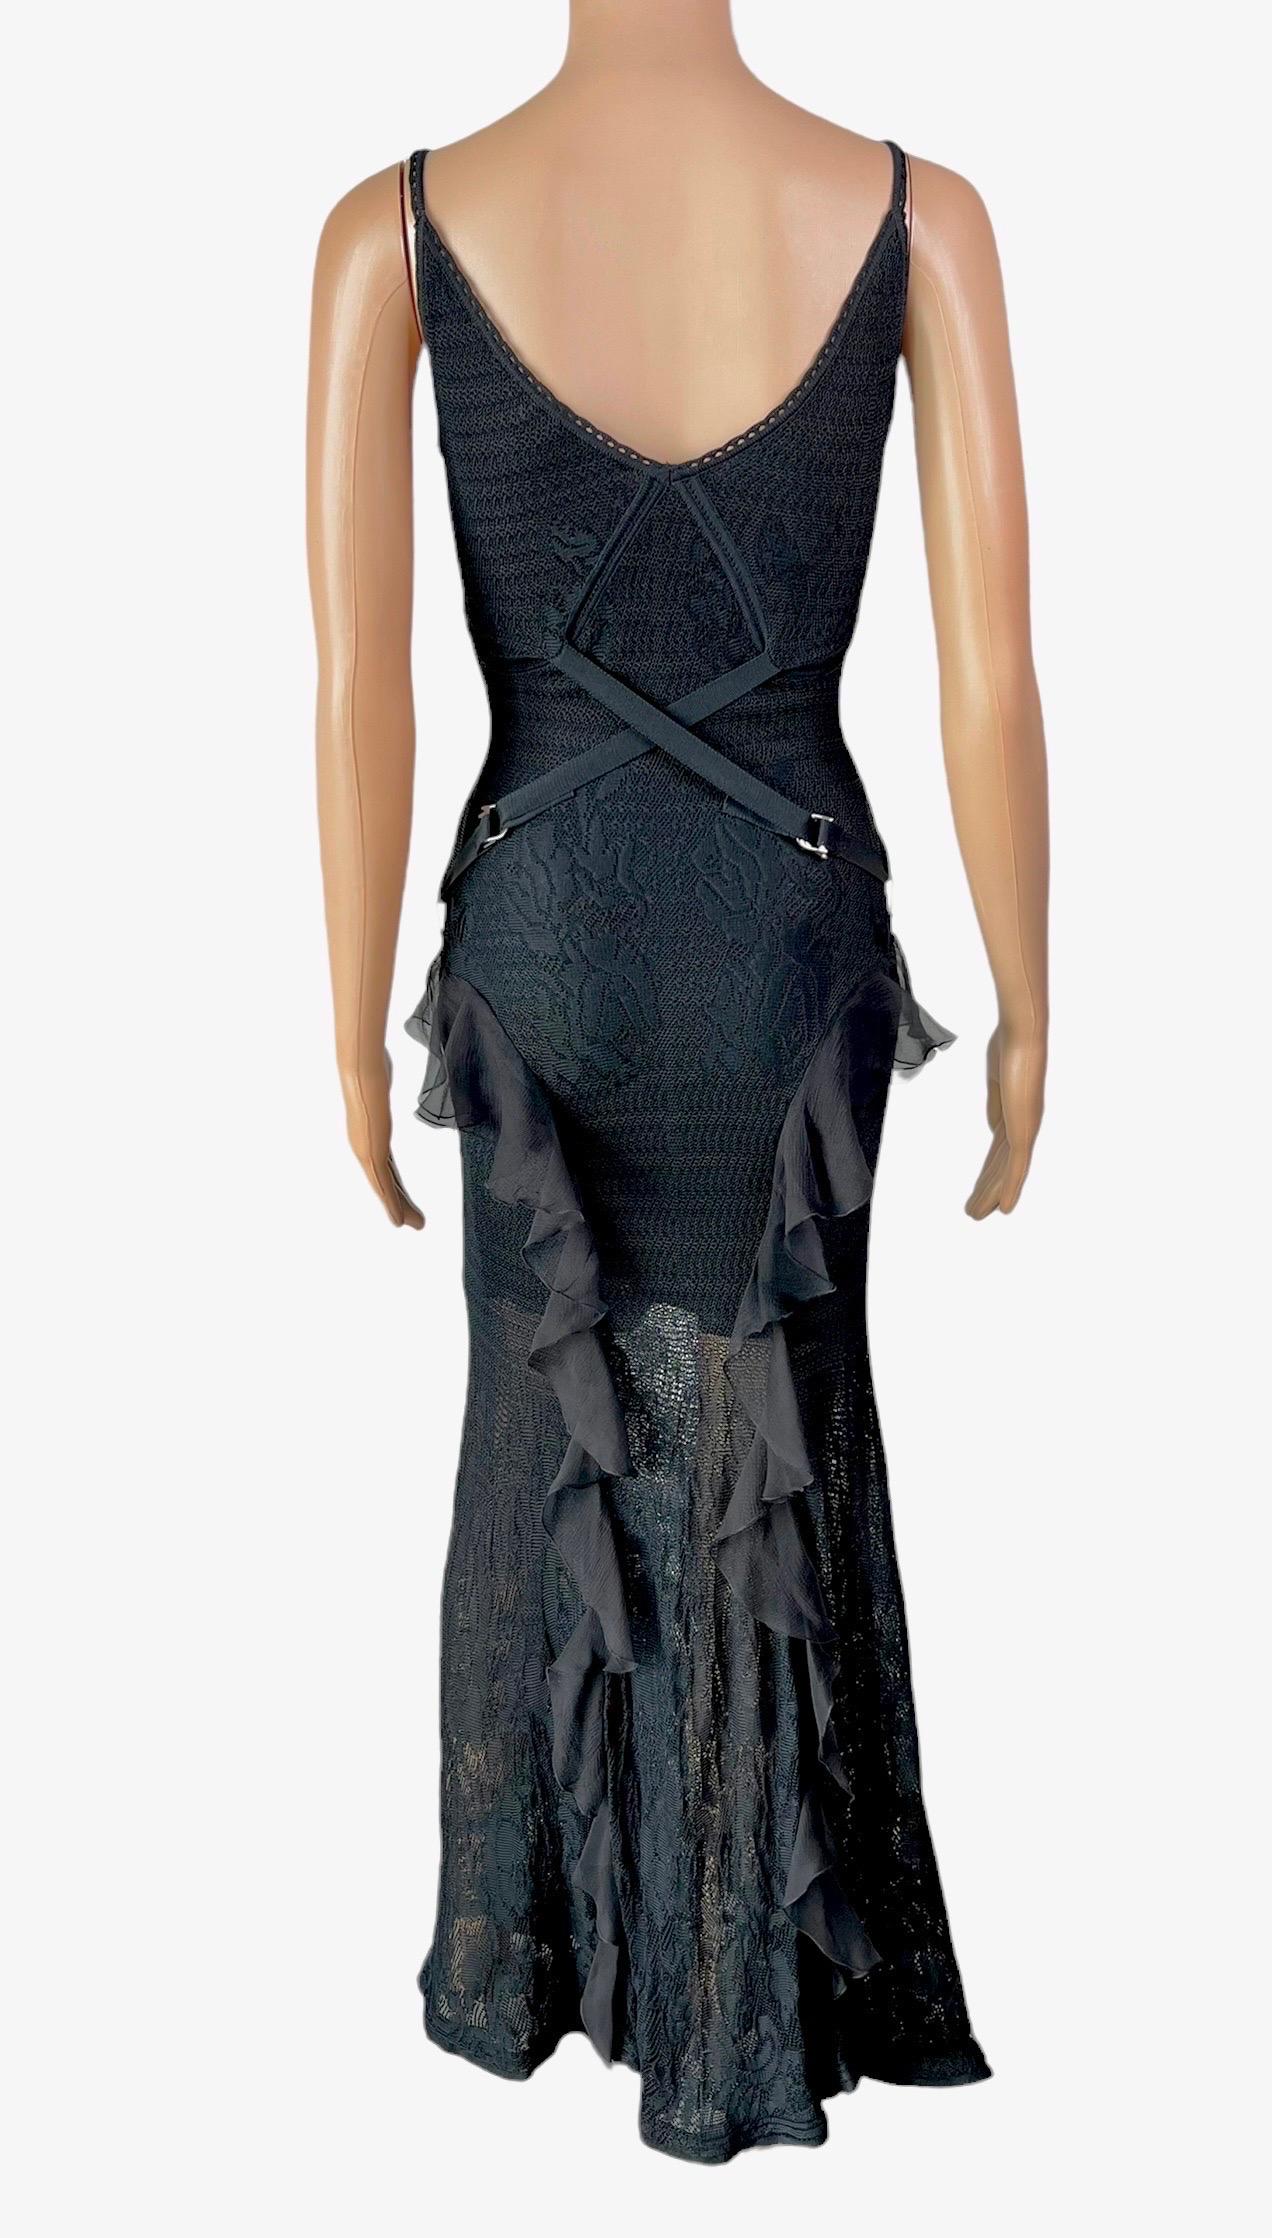 Christian Dior by John Galliano S/S2003 Sheer Lace Knit Black Evening Dress Gown In Good Condition For Sale In Naples, FL